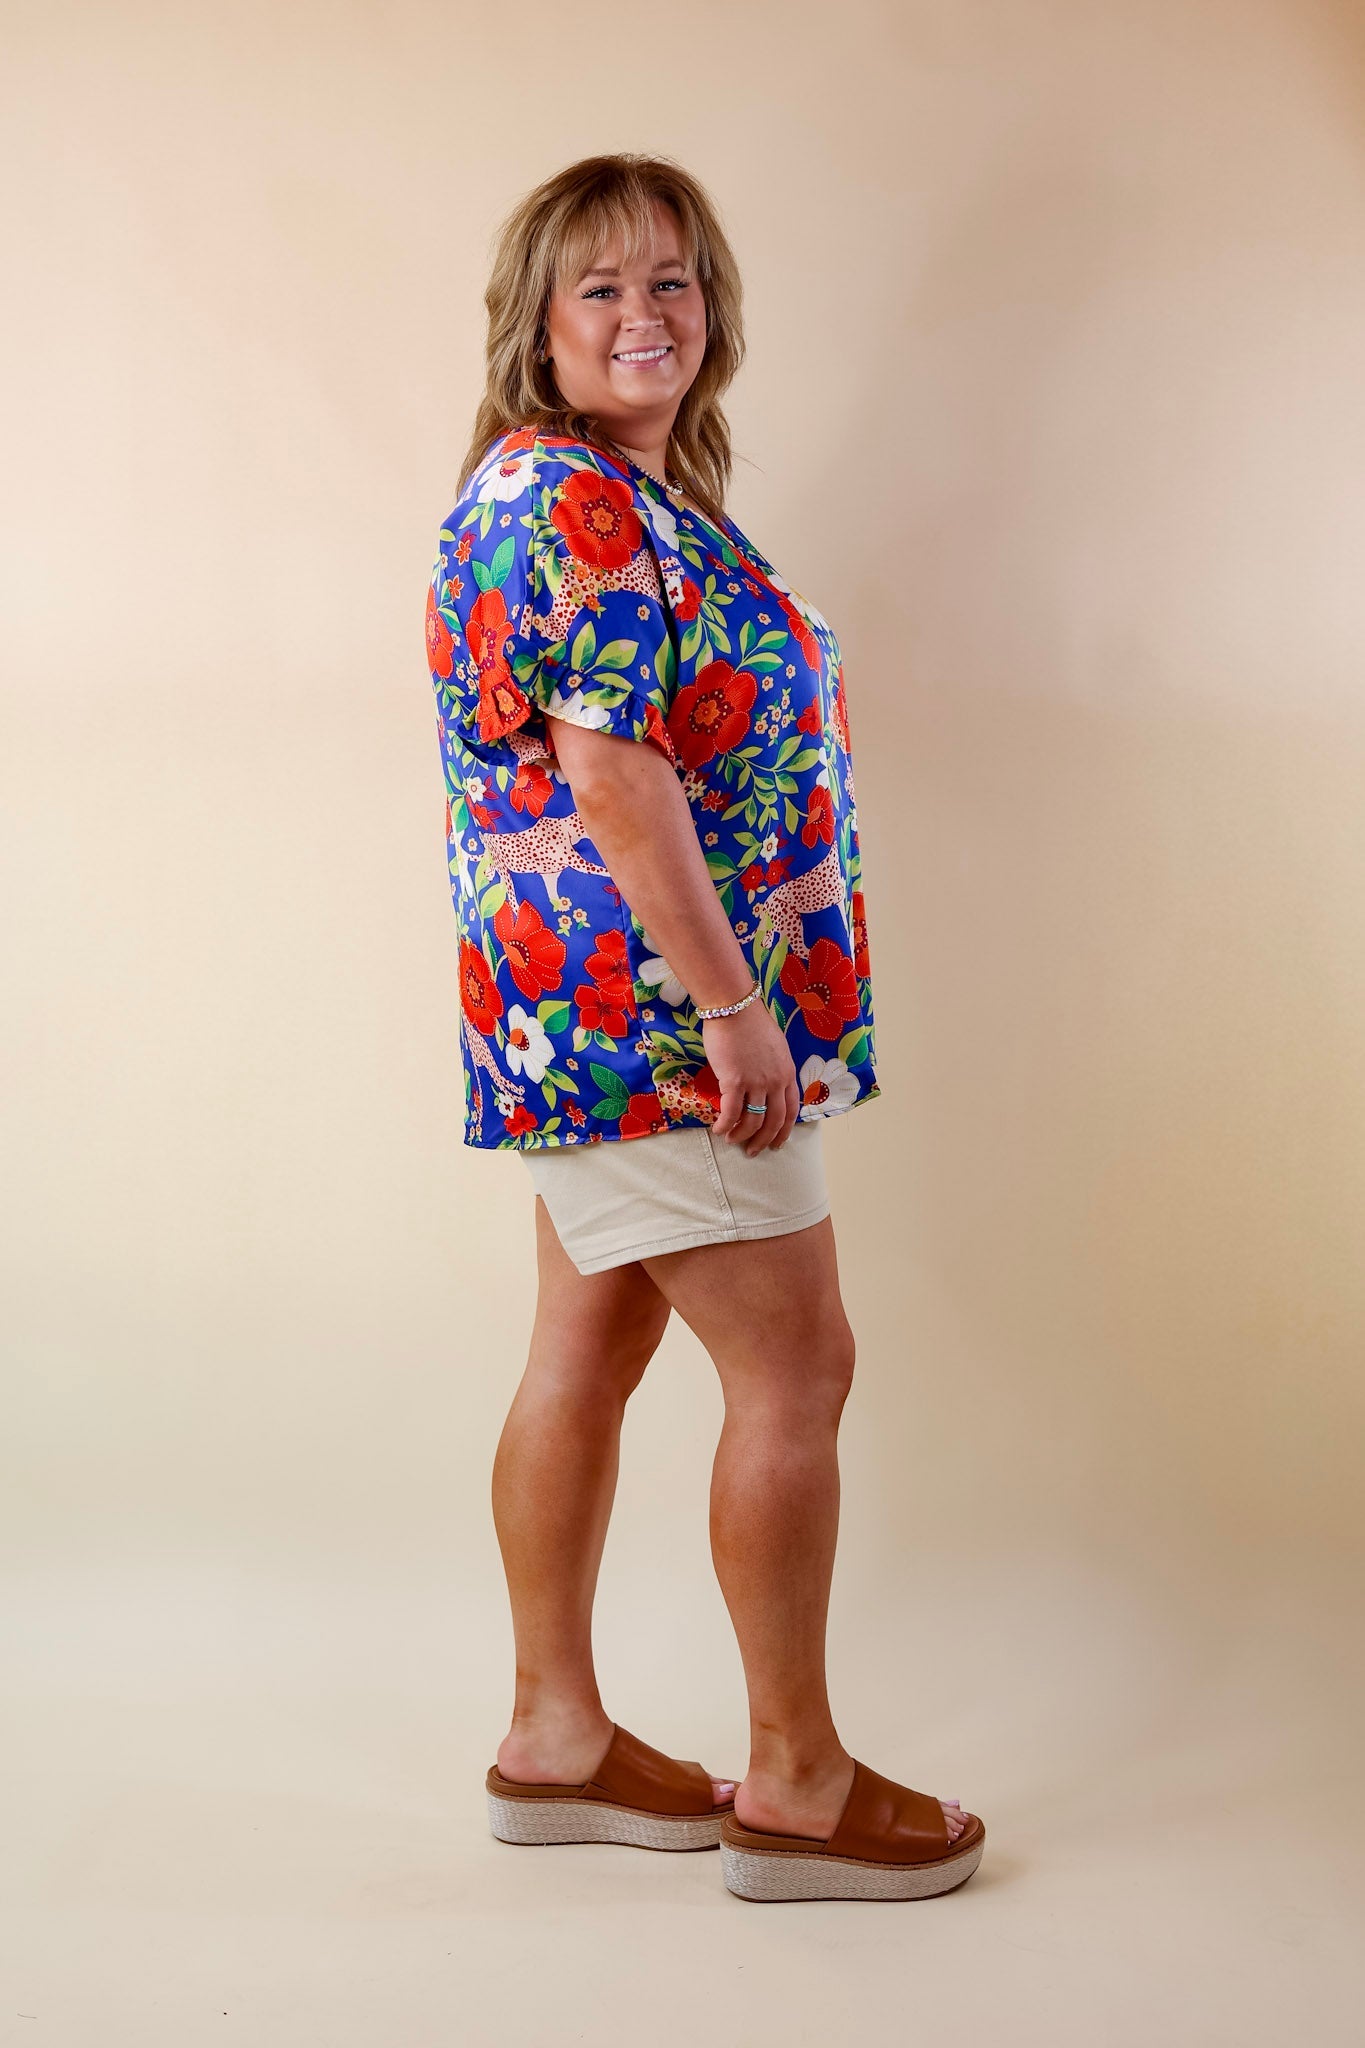 Best Version Floral and Cheetah Print V Neck Top with Ruffle Short Sleeves in Blue - Giddy Up Glamour Boutique